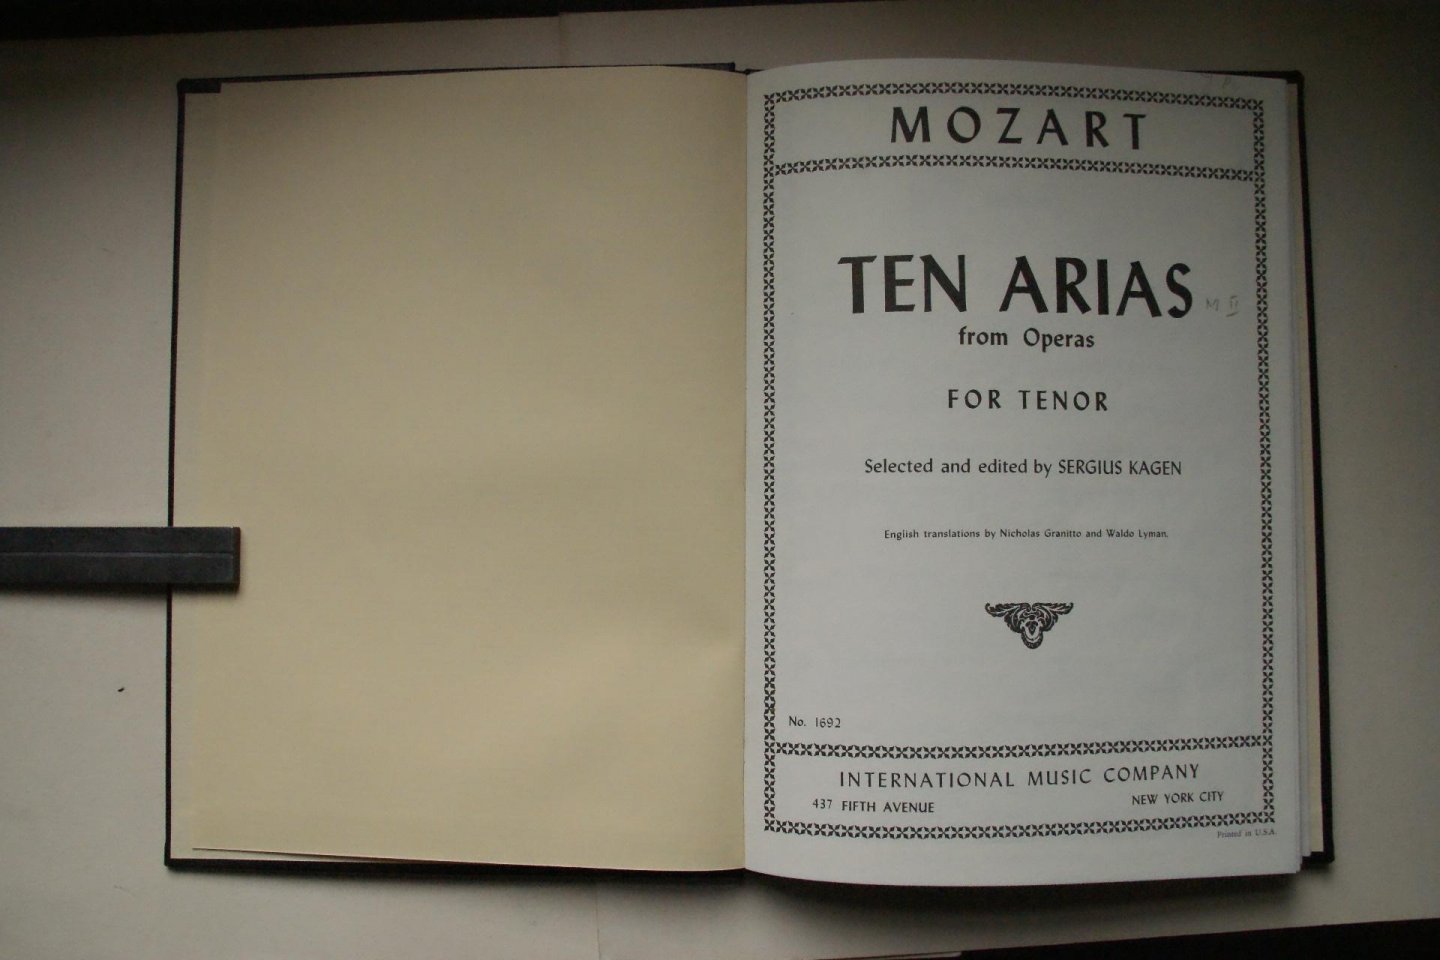 Mozart, Wolfgang Amadeus - Ten Arias from operas for Tenor selected and edited by Sergius Kage  no.1692  English translations by Nicholas Granitto and Waldo Lyman